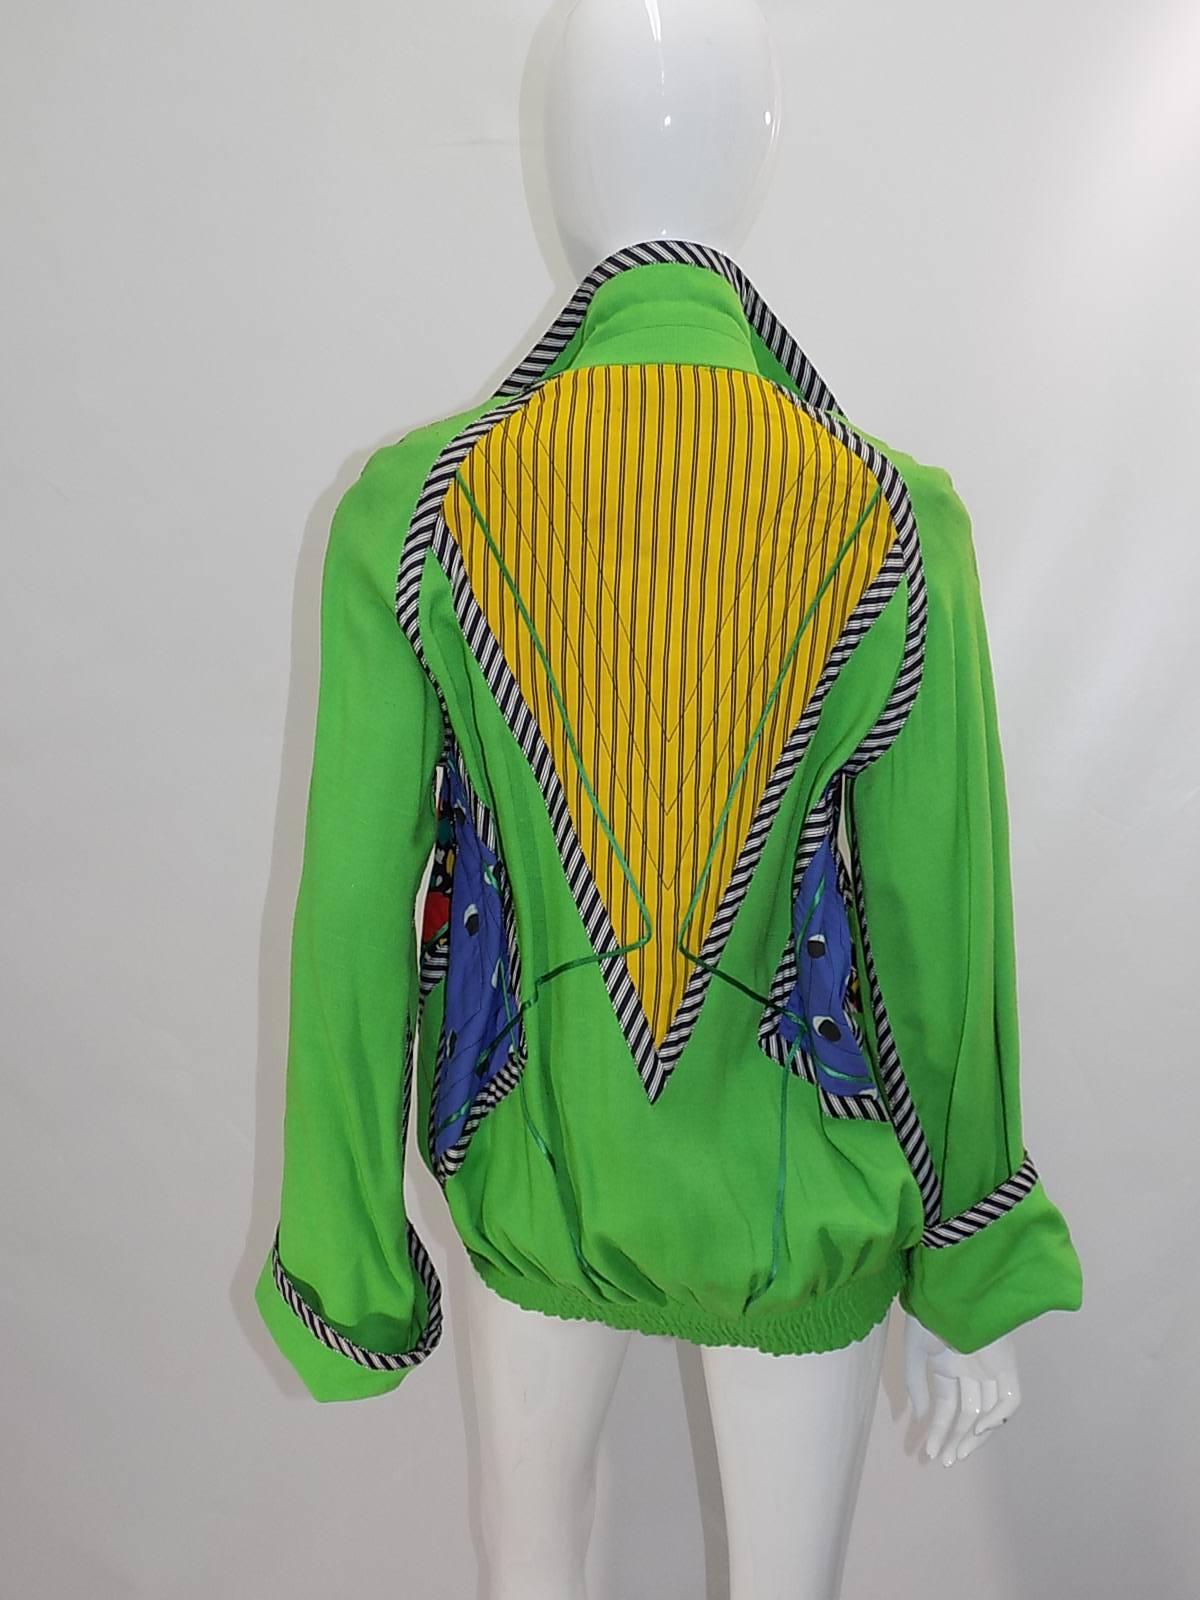 Never seen and in pristine condition!! Vibrant green color. Color block pattern patchwork design. Wide cuffed sleeves, elastic waist and zip front closure. Pristine condition!! Will fit sizes 4-6
